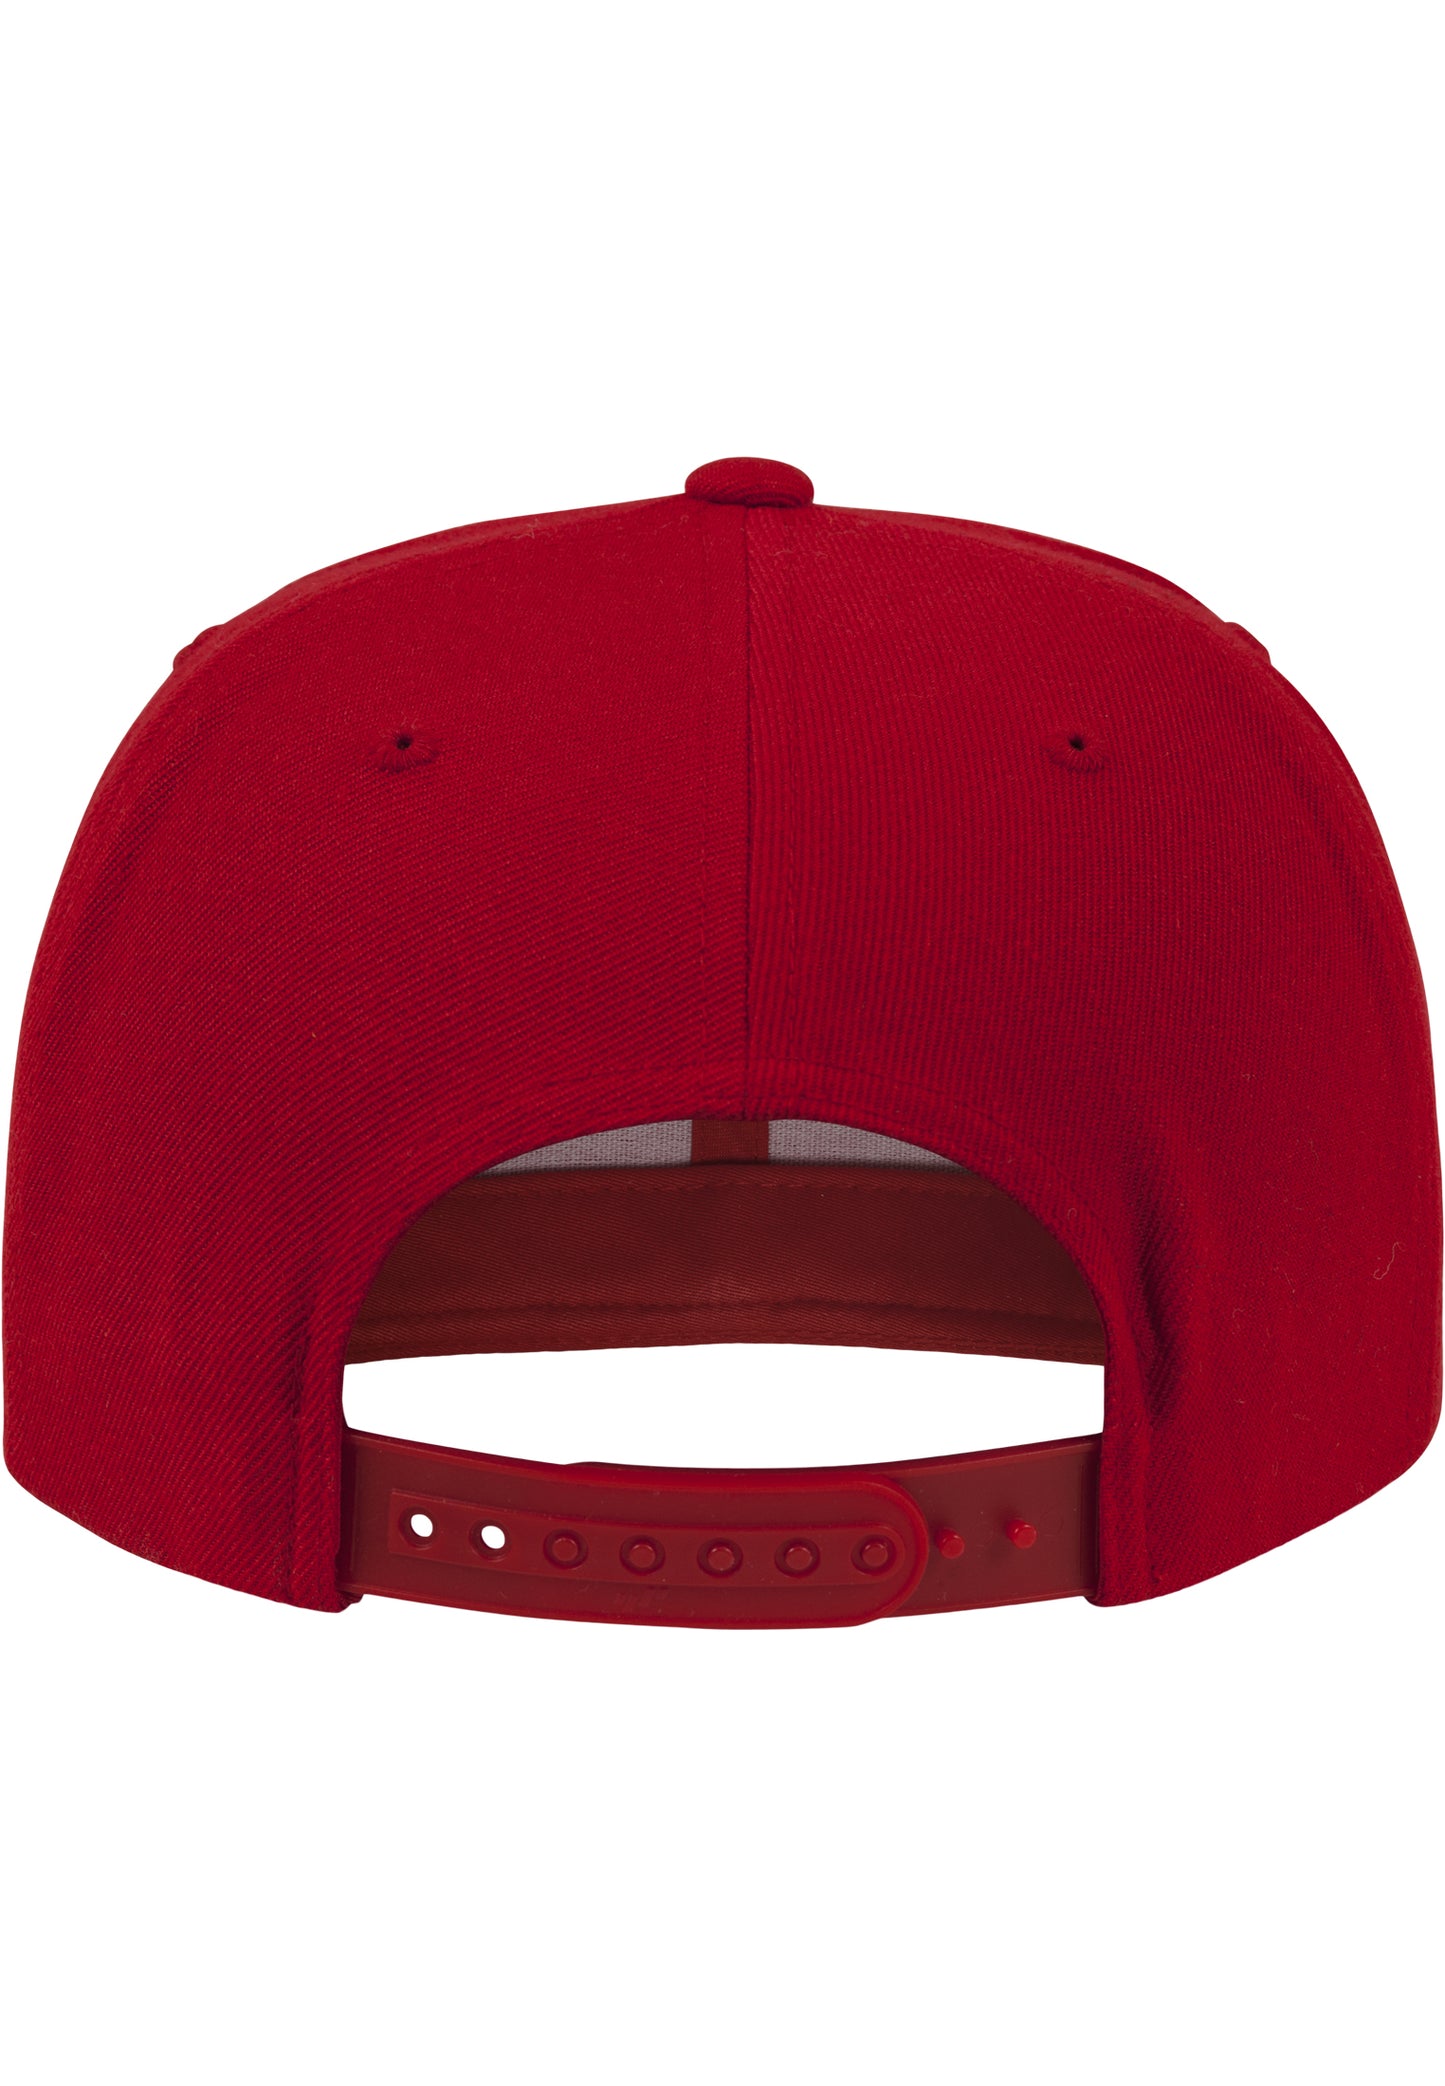 Classic Snapback - Red/Red - Headz Up 